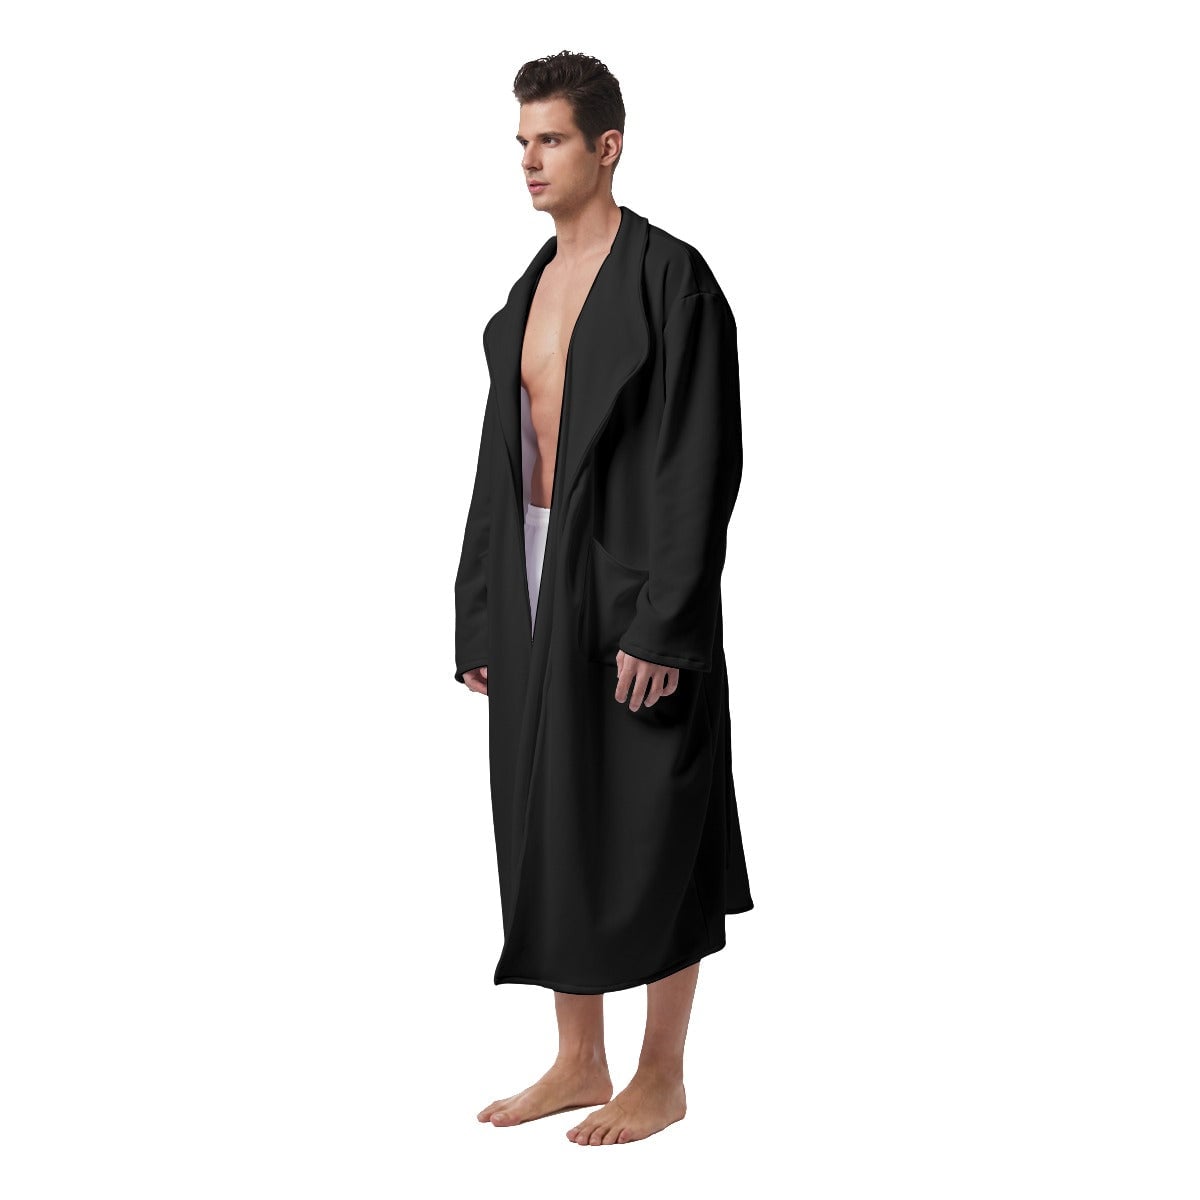 There is only one Rule in this Jungle Fleece Robe